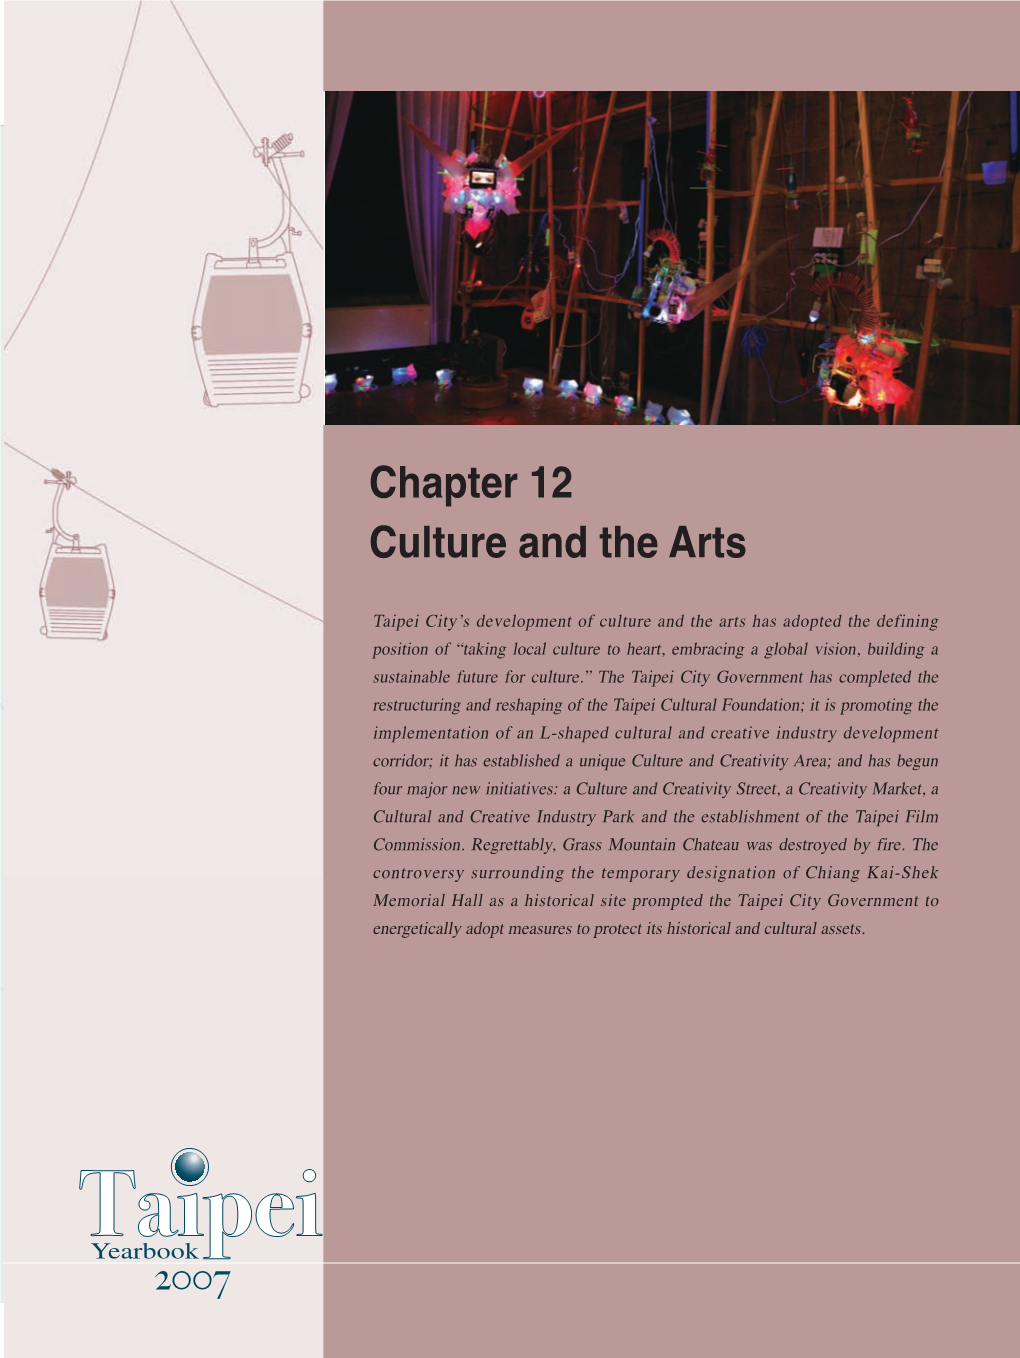 Chapter 12 Culture and the Arts